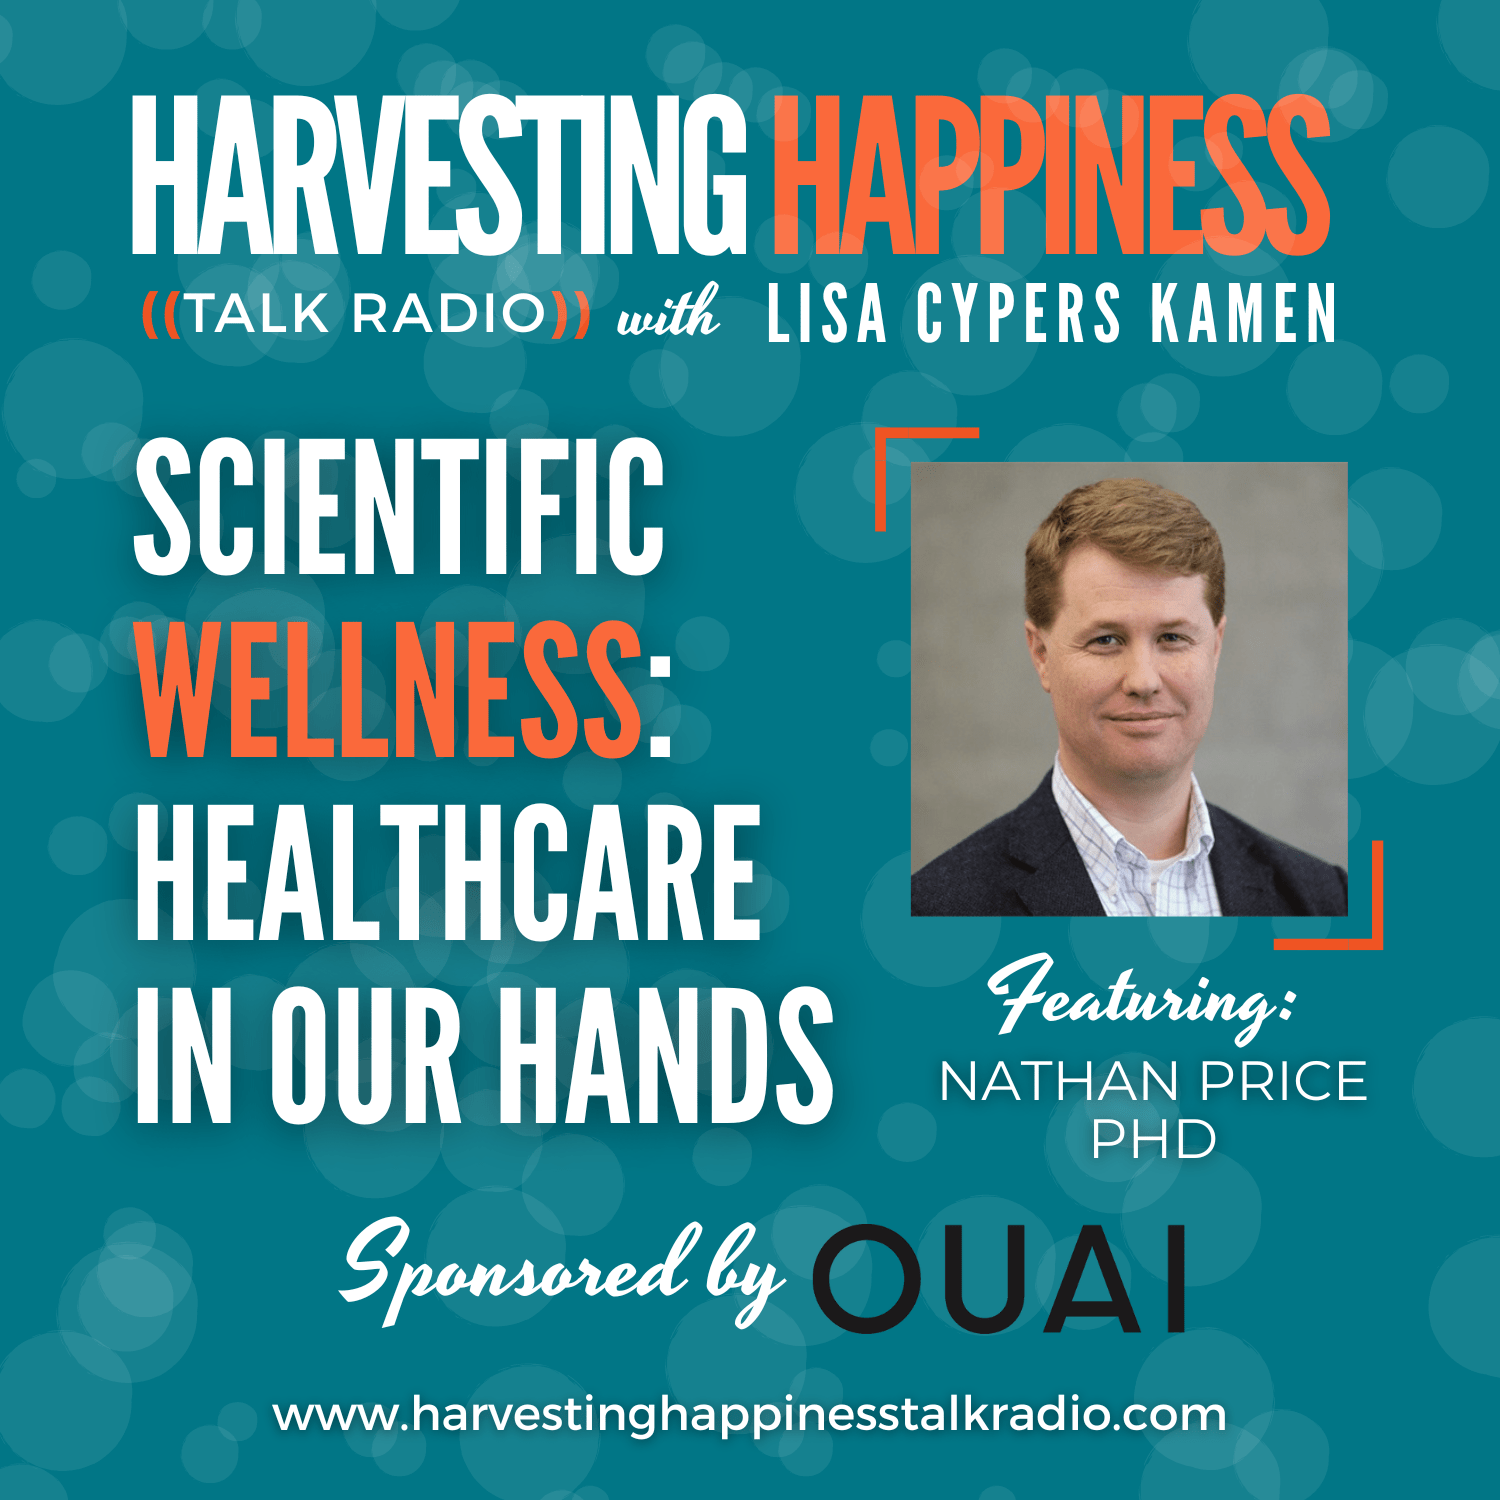 Podcast episode about wellness and healthcare with Nathan Price, PhD